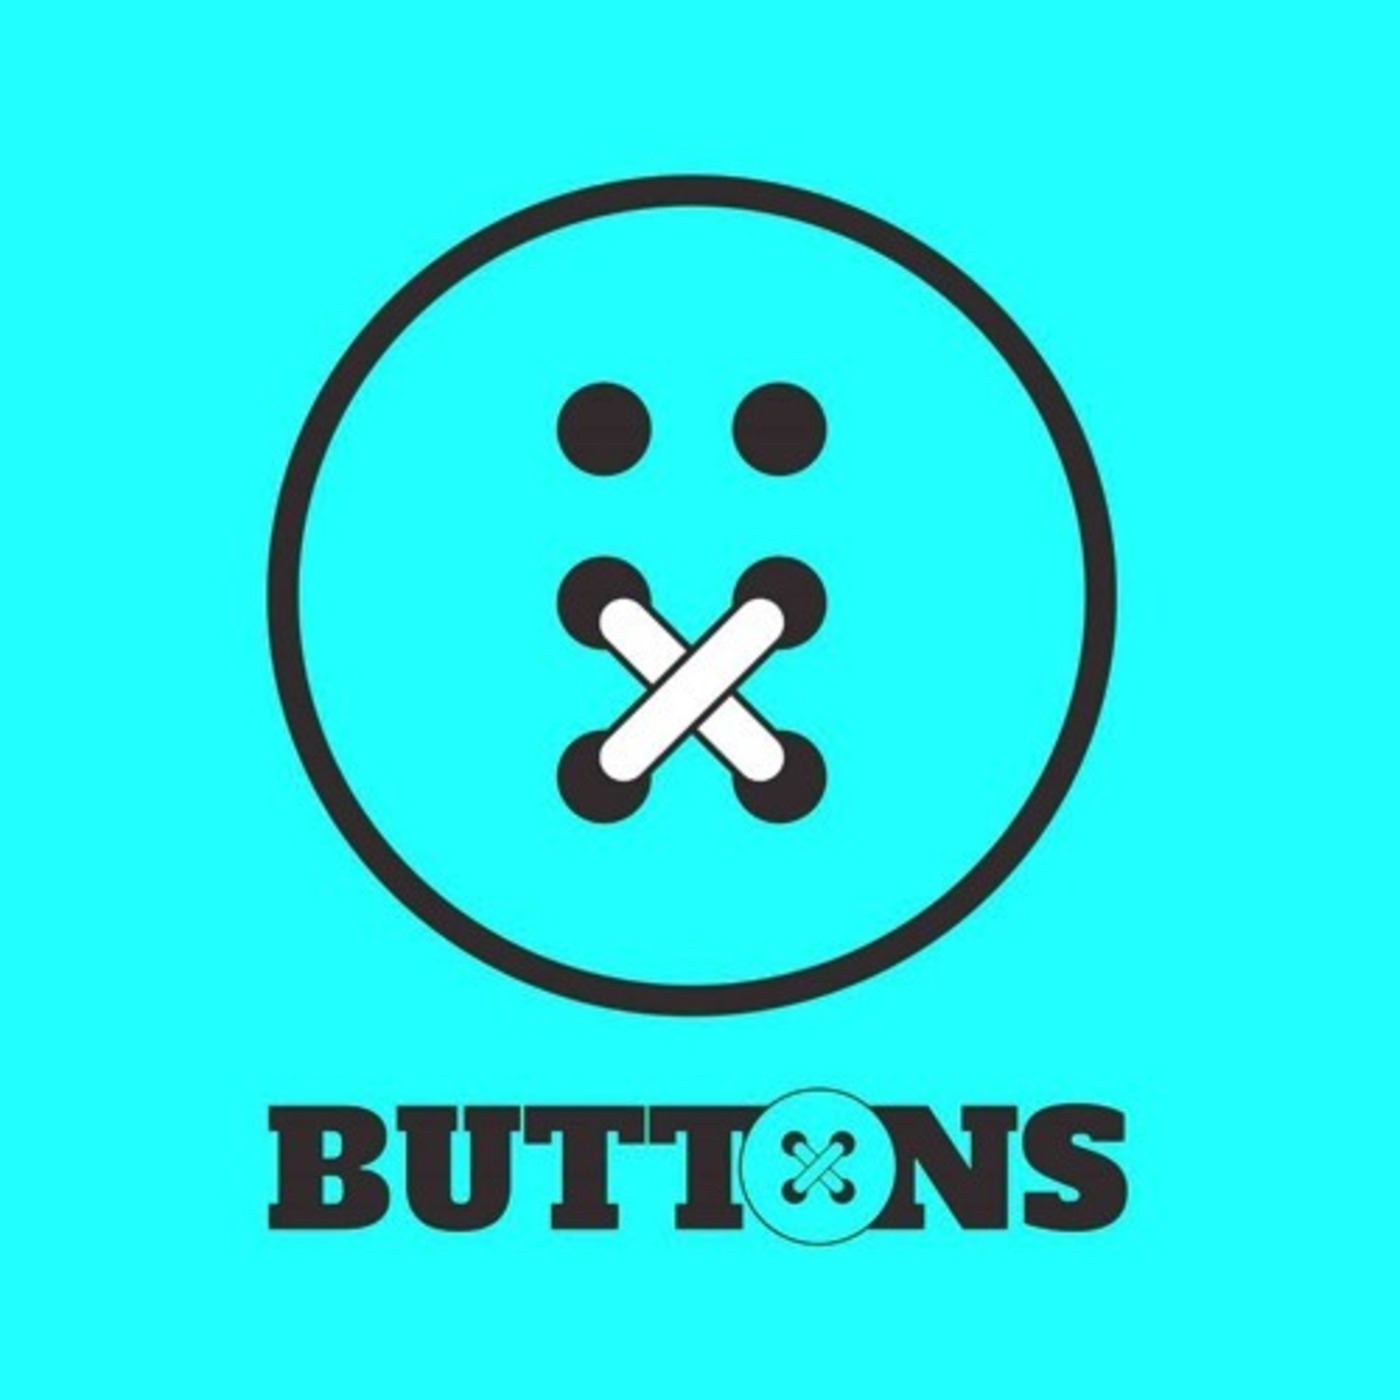 Buttons at ://about blank (20.07.19)